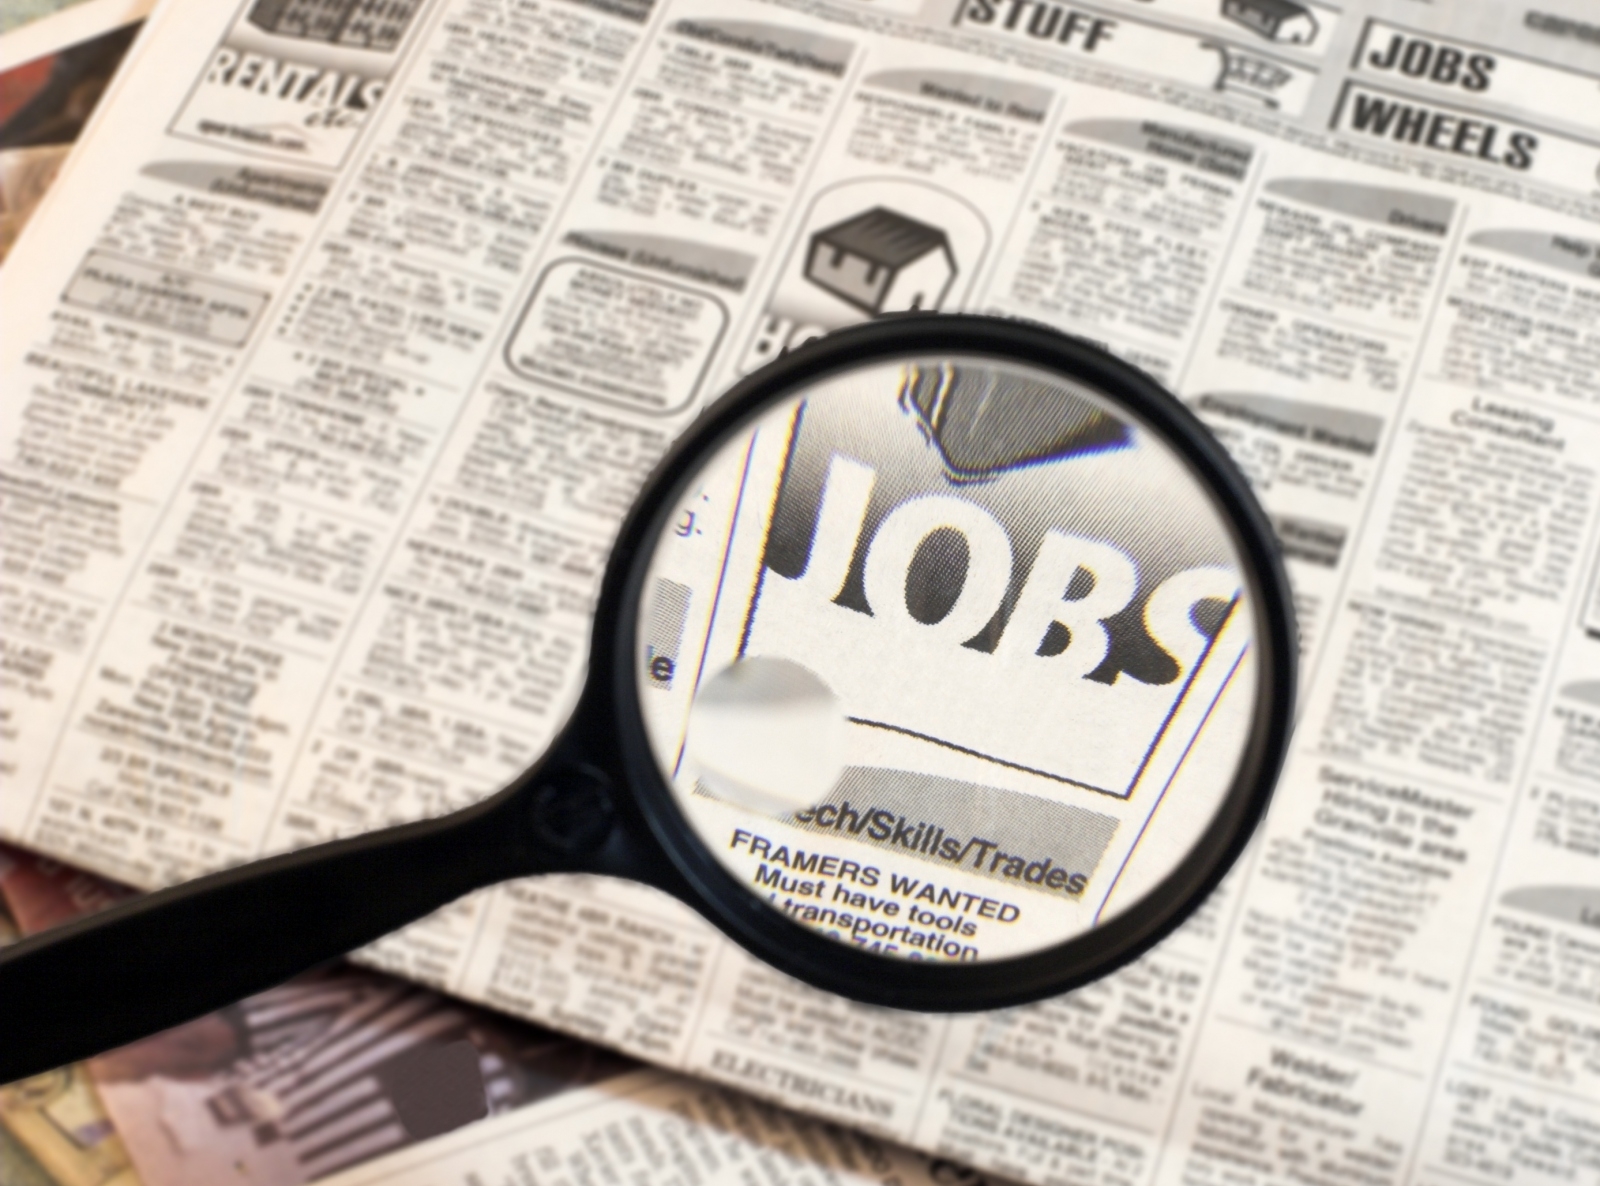 Get a better job, more pay during April-June job search